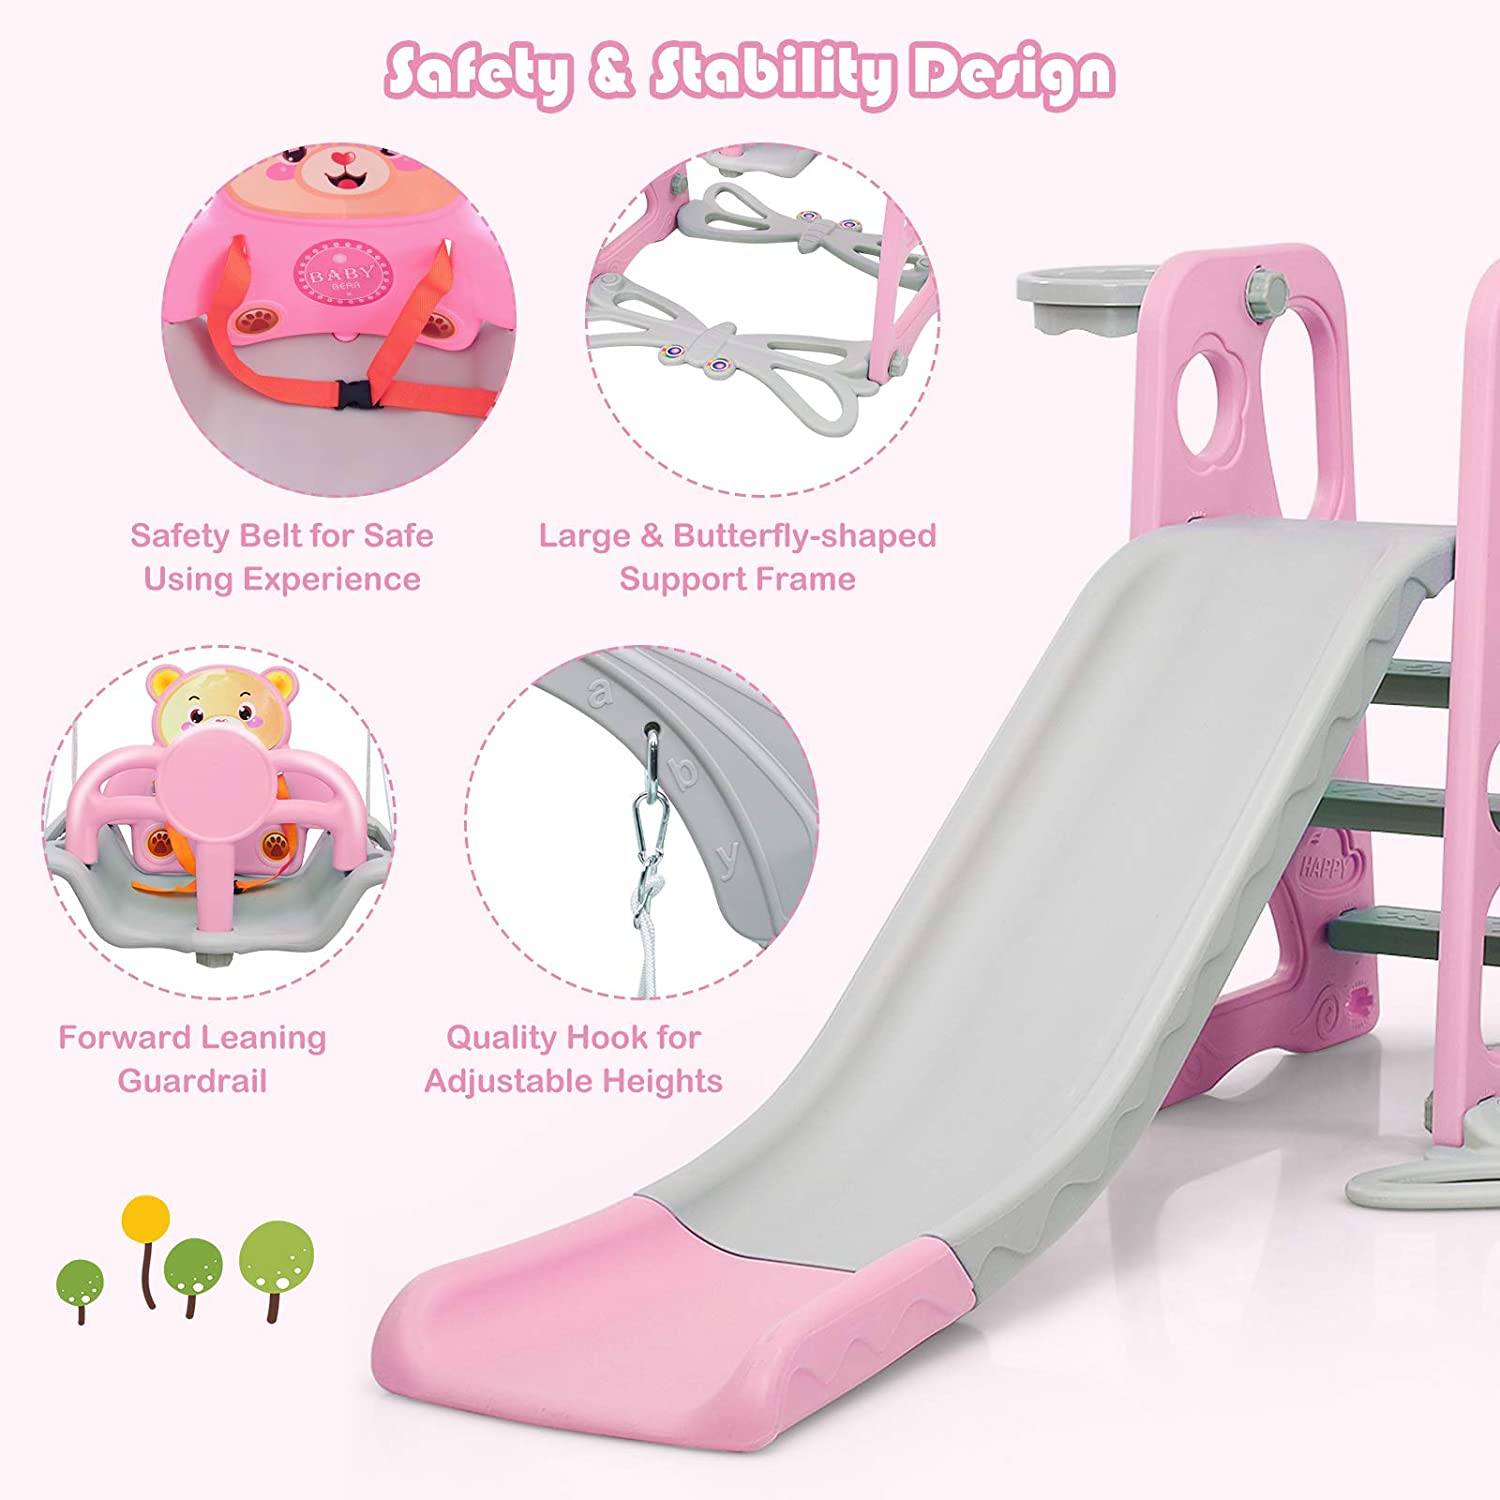 Chairliving 4-in-1 Kids Swing and Slide Set Toddler Climber Slide Playset with Basketball Hoop Safety Belt